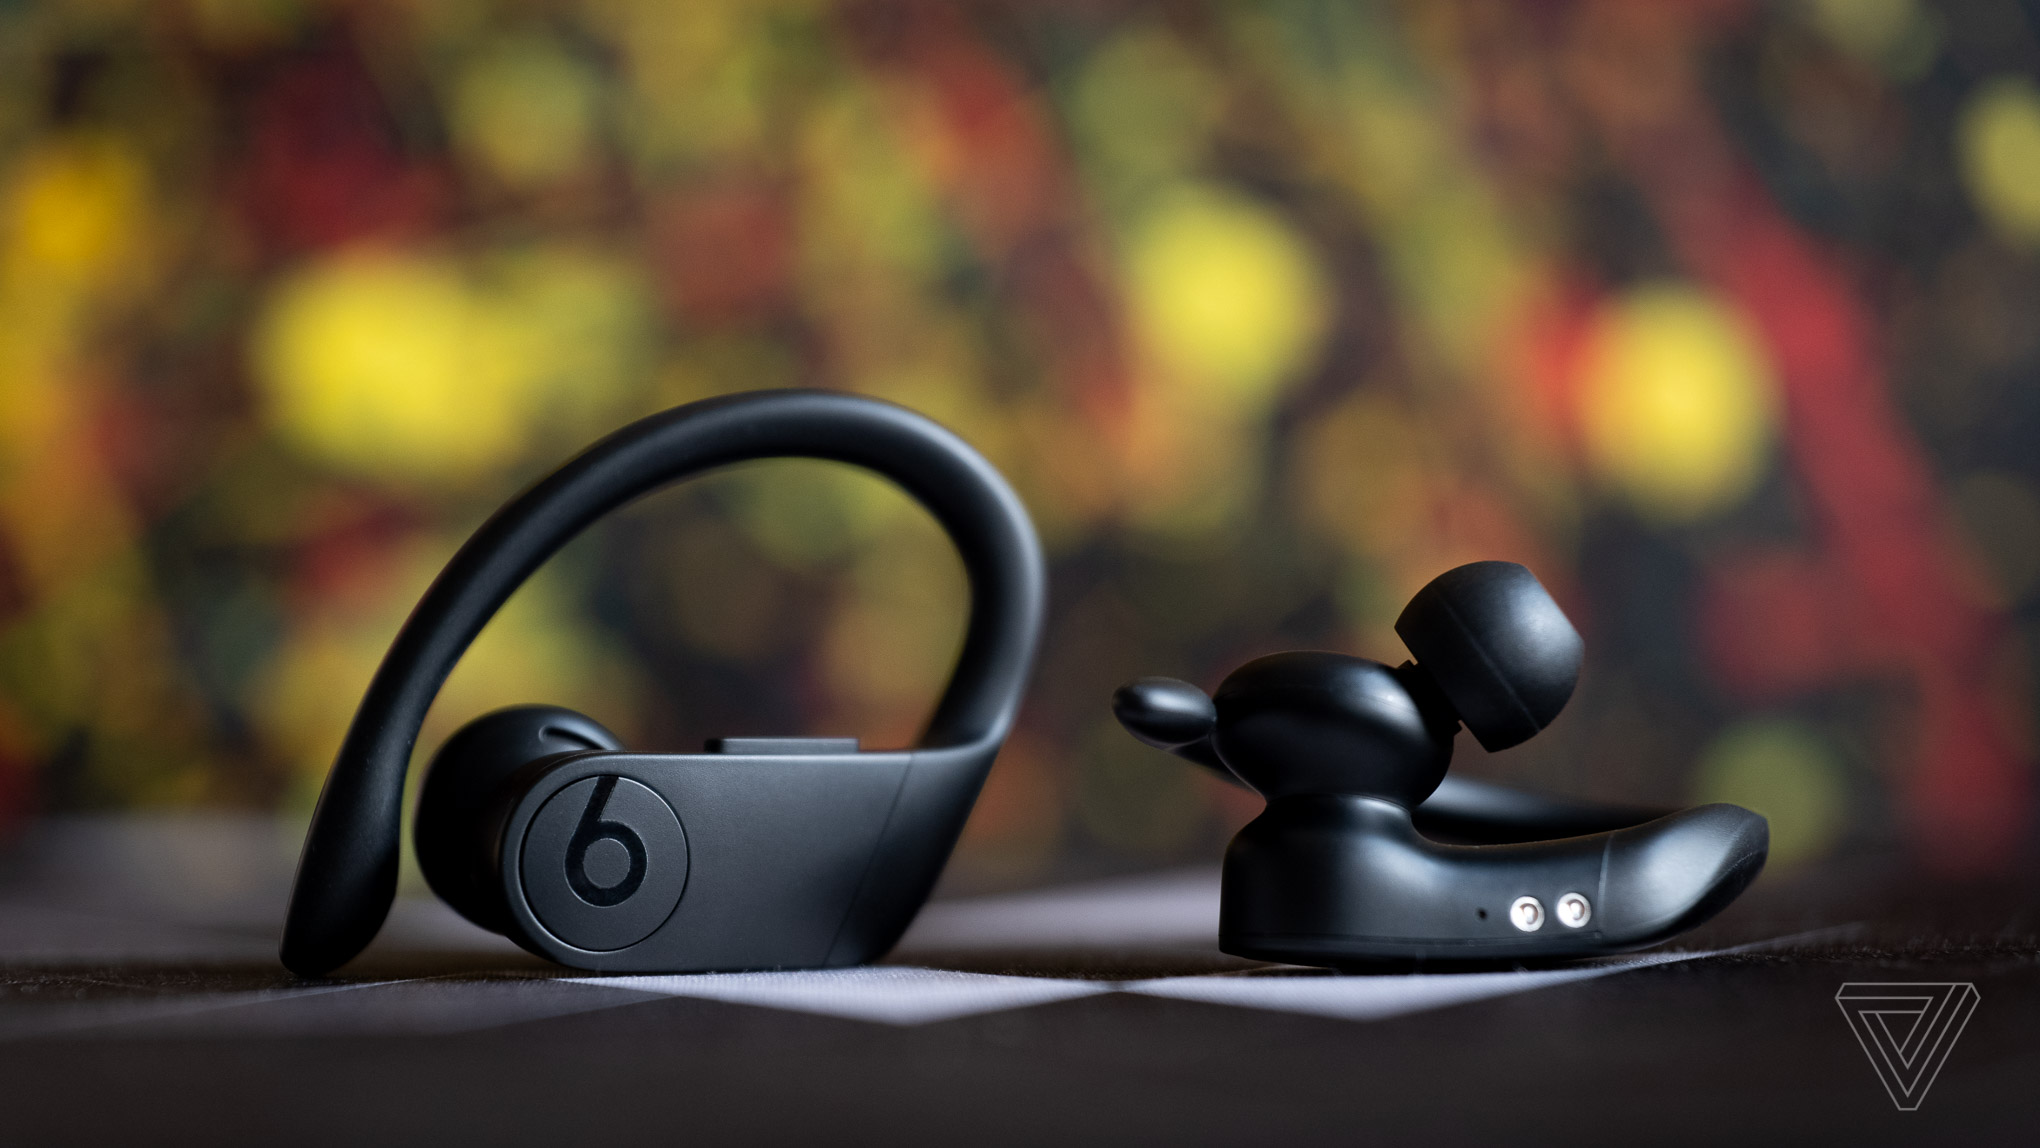 An image of the Powerbeats Pro, the best wireless earbuds for fitness.